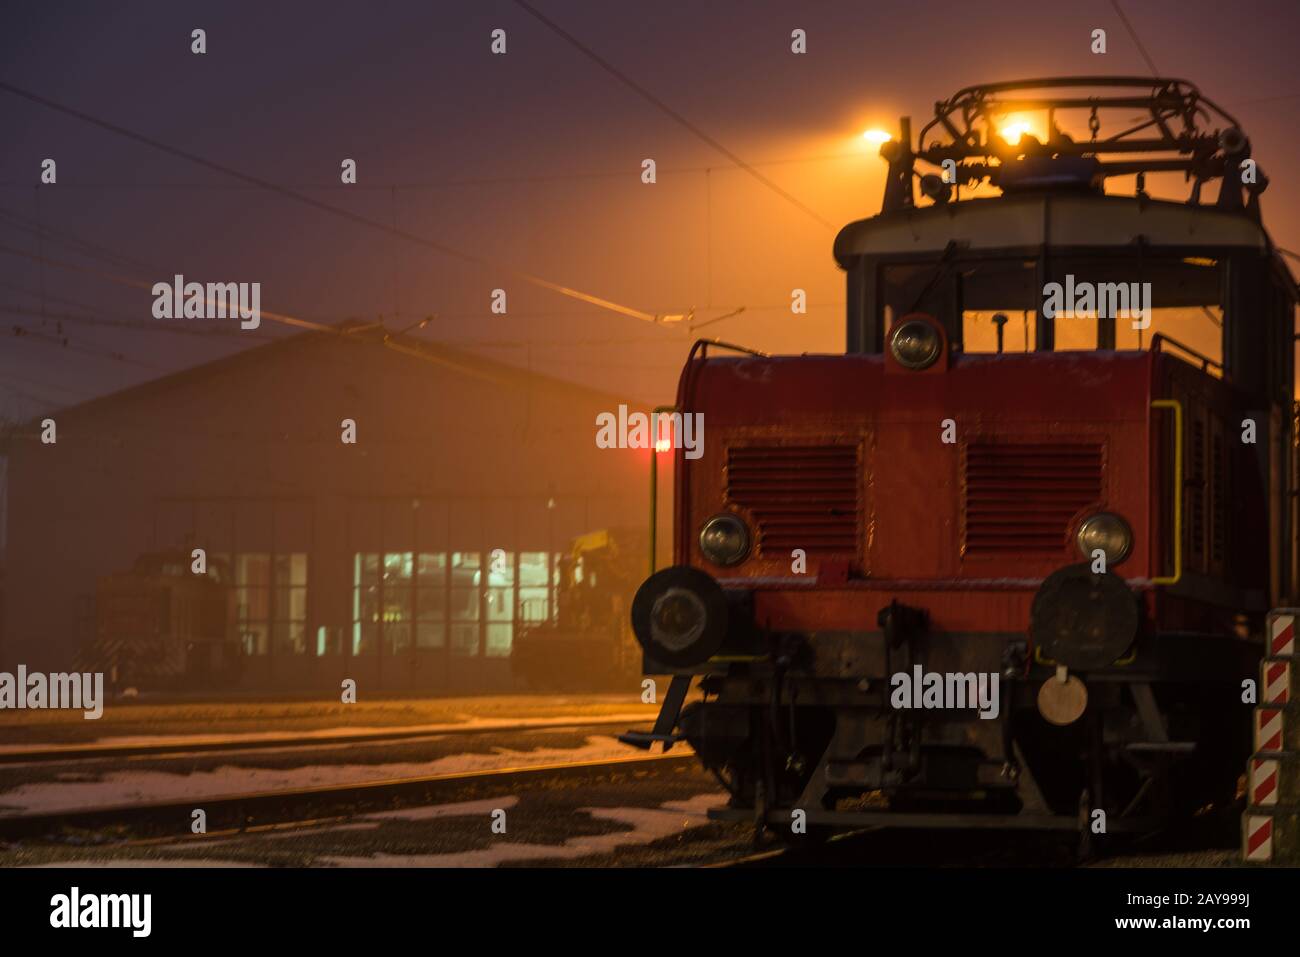 eerie mood at the station with freight train at night lighting Stock Photo